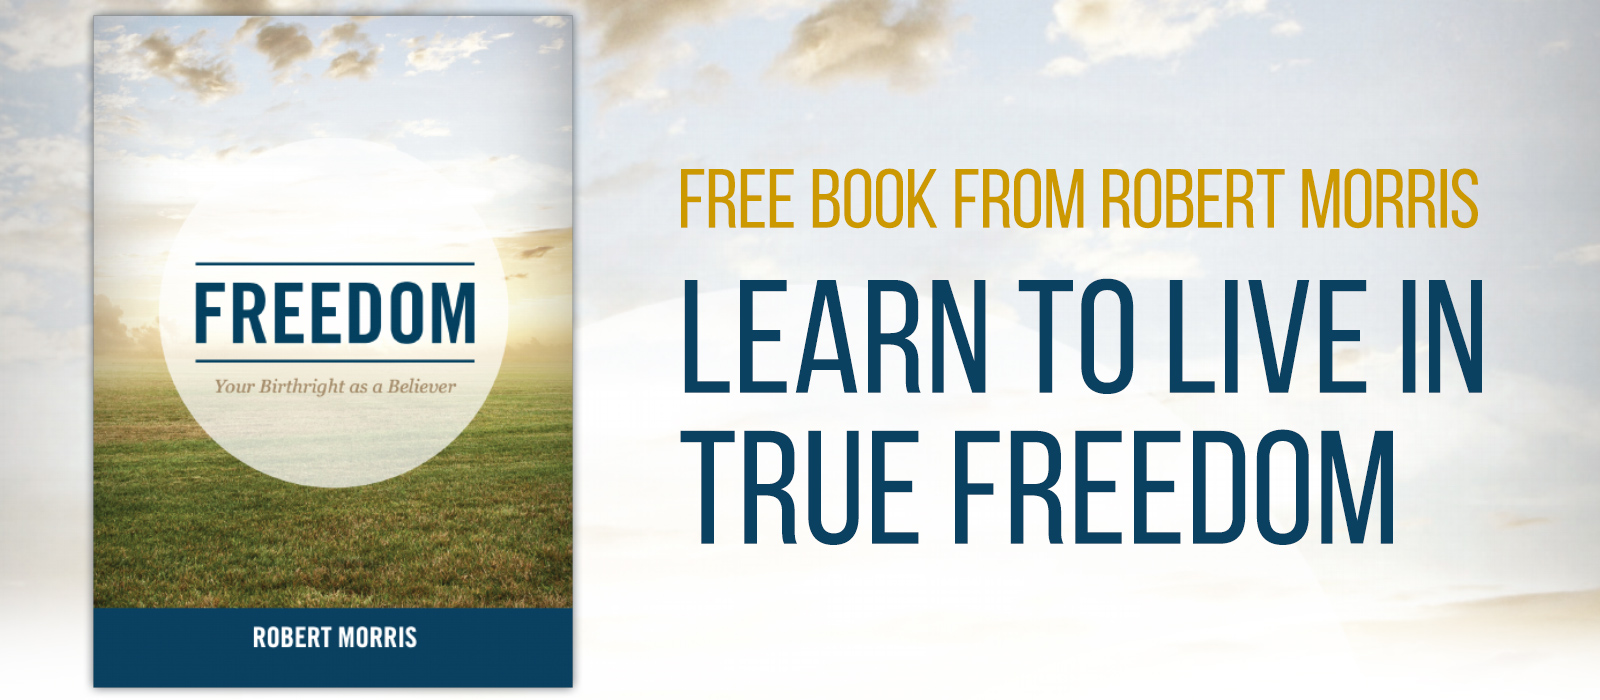 FREE Book from Robert Morris - Learn to Live in True Freedom